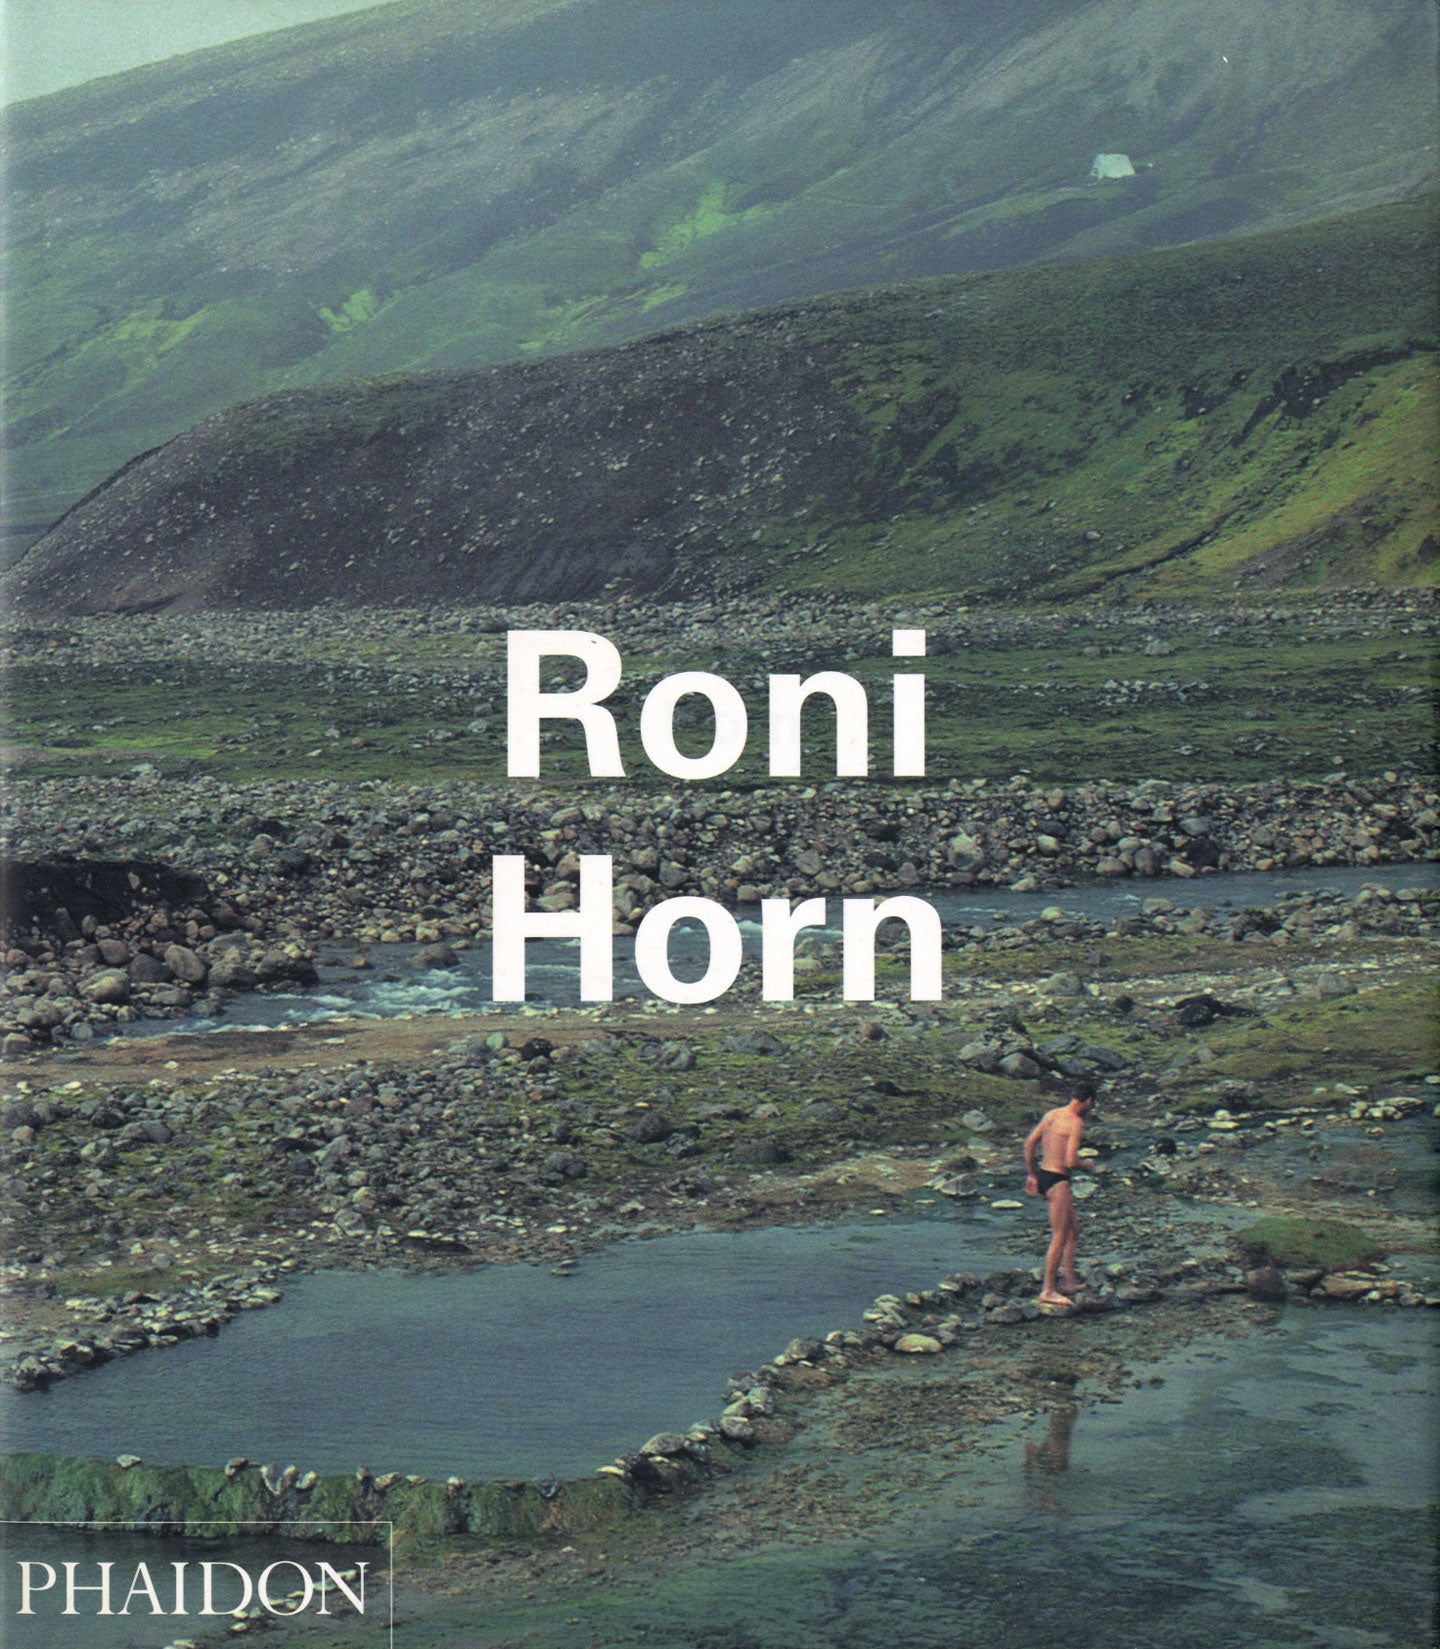 Roni Horn (Phaidon Contemporary Artists Series) [SIGNED]